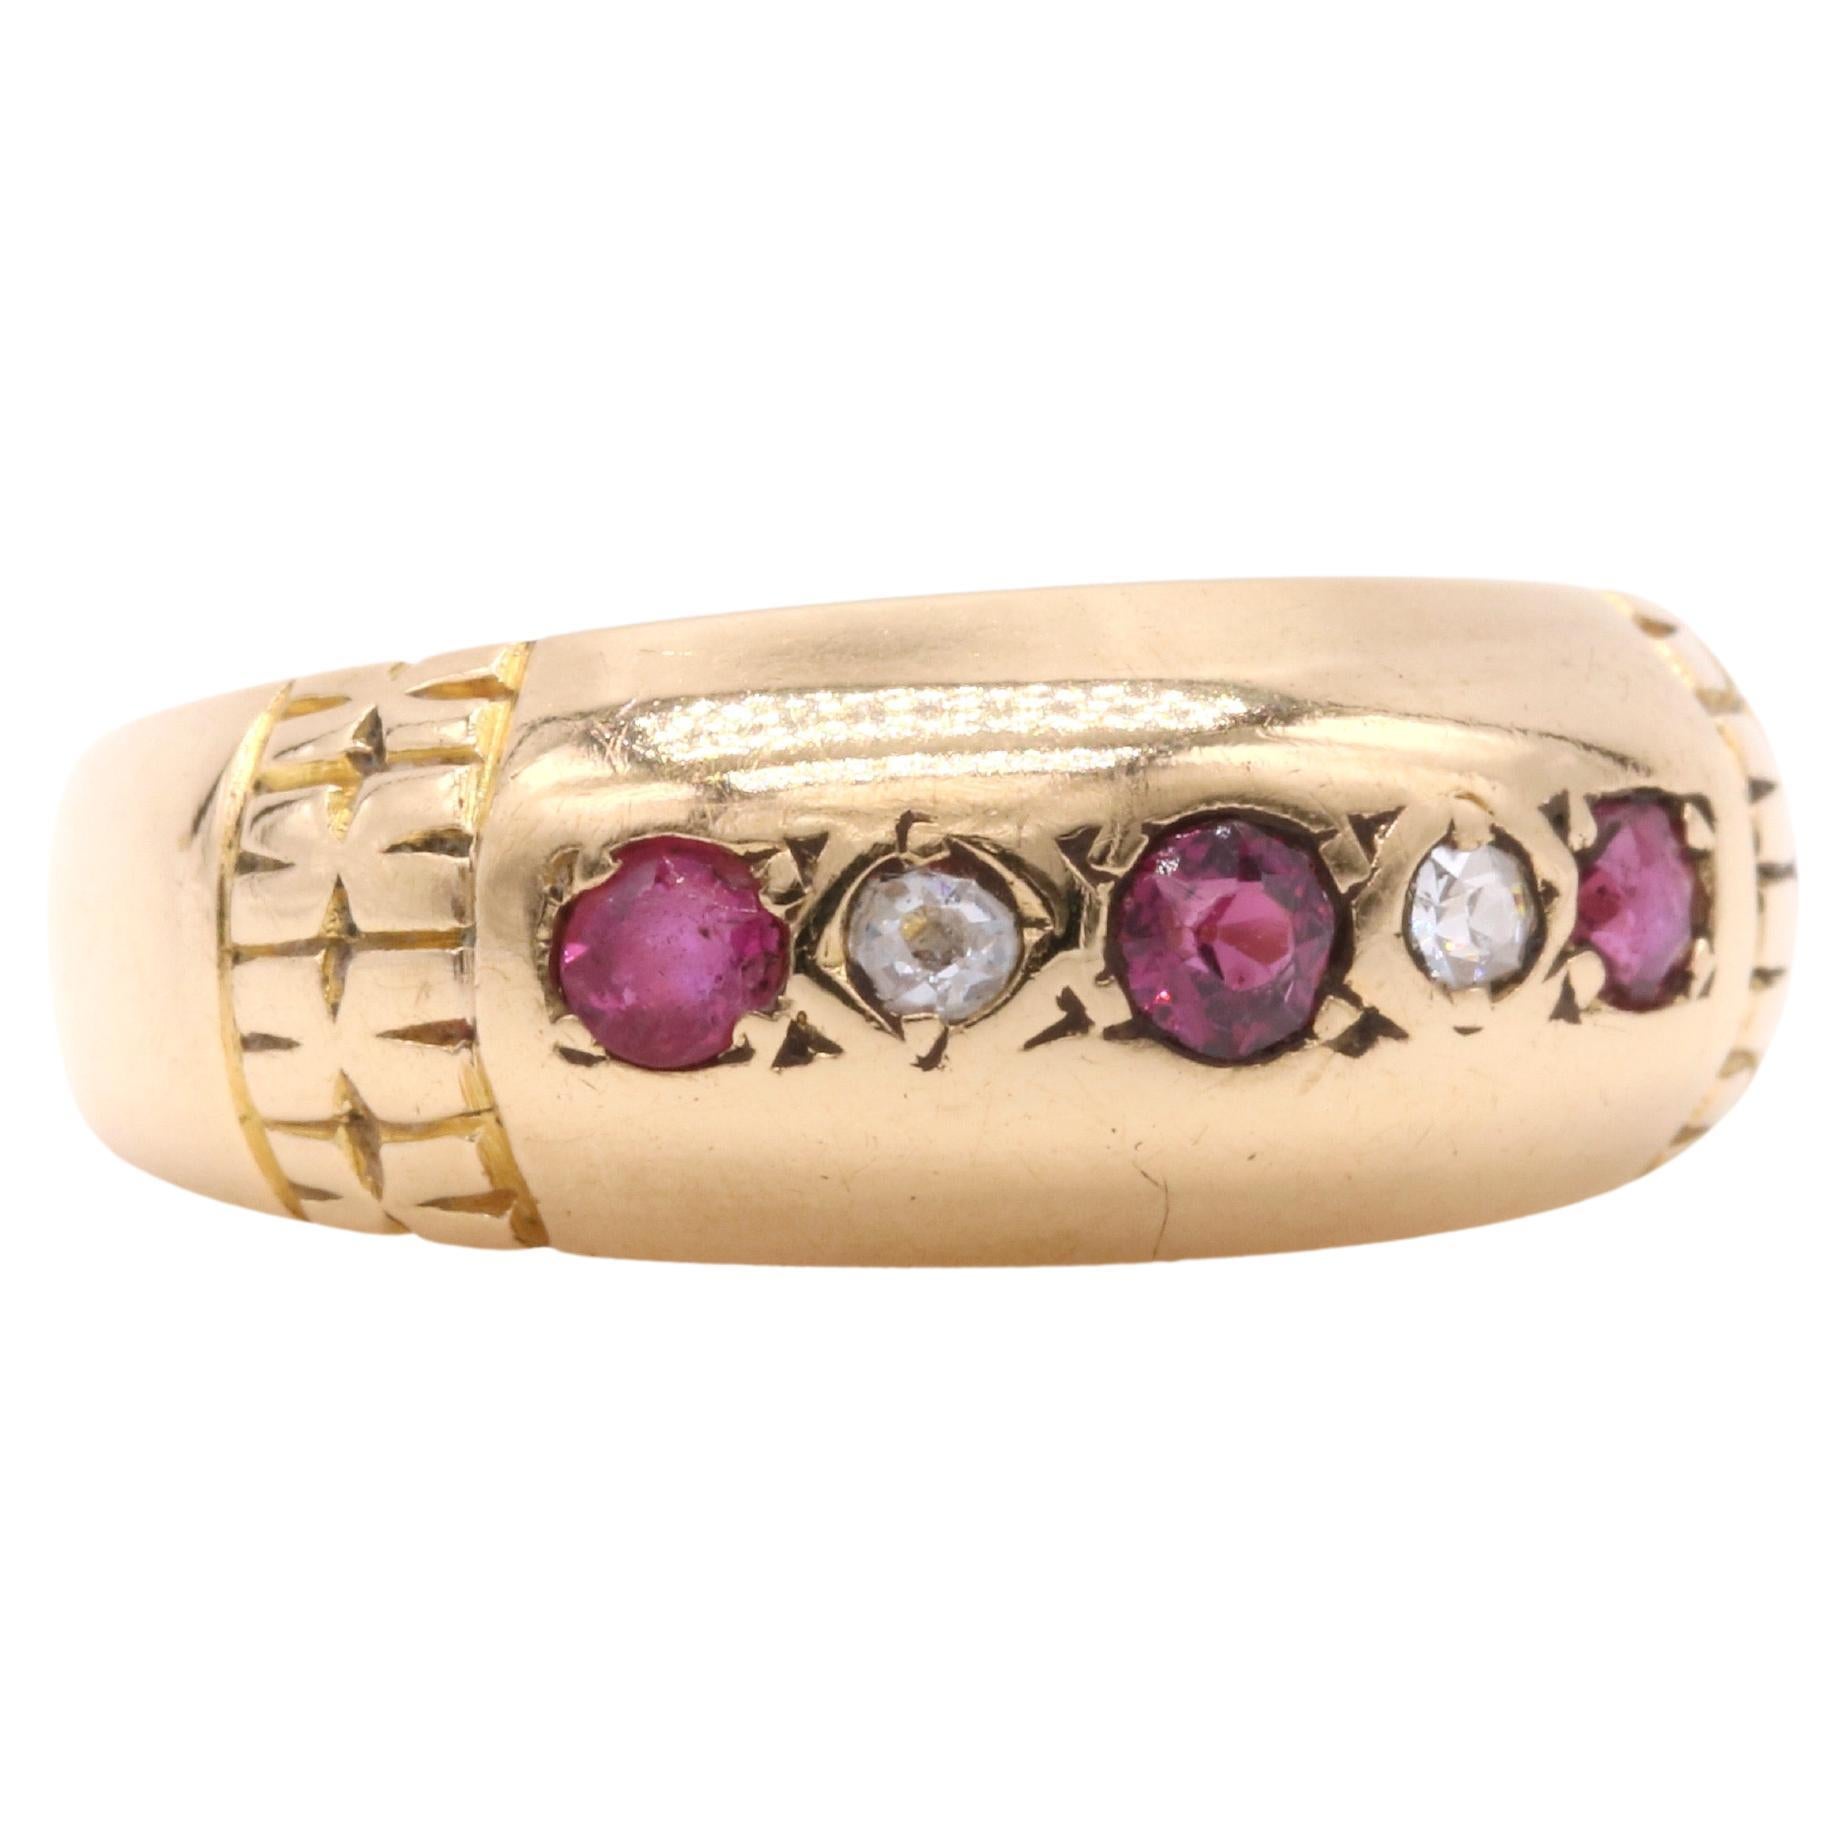 Antique Edwardian 18K Yellow Gold 5 Stone Amethyst, Ruby and Diamond Band Ring